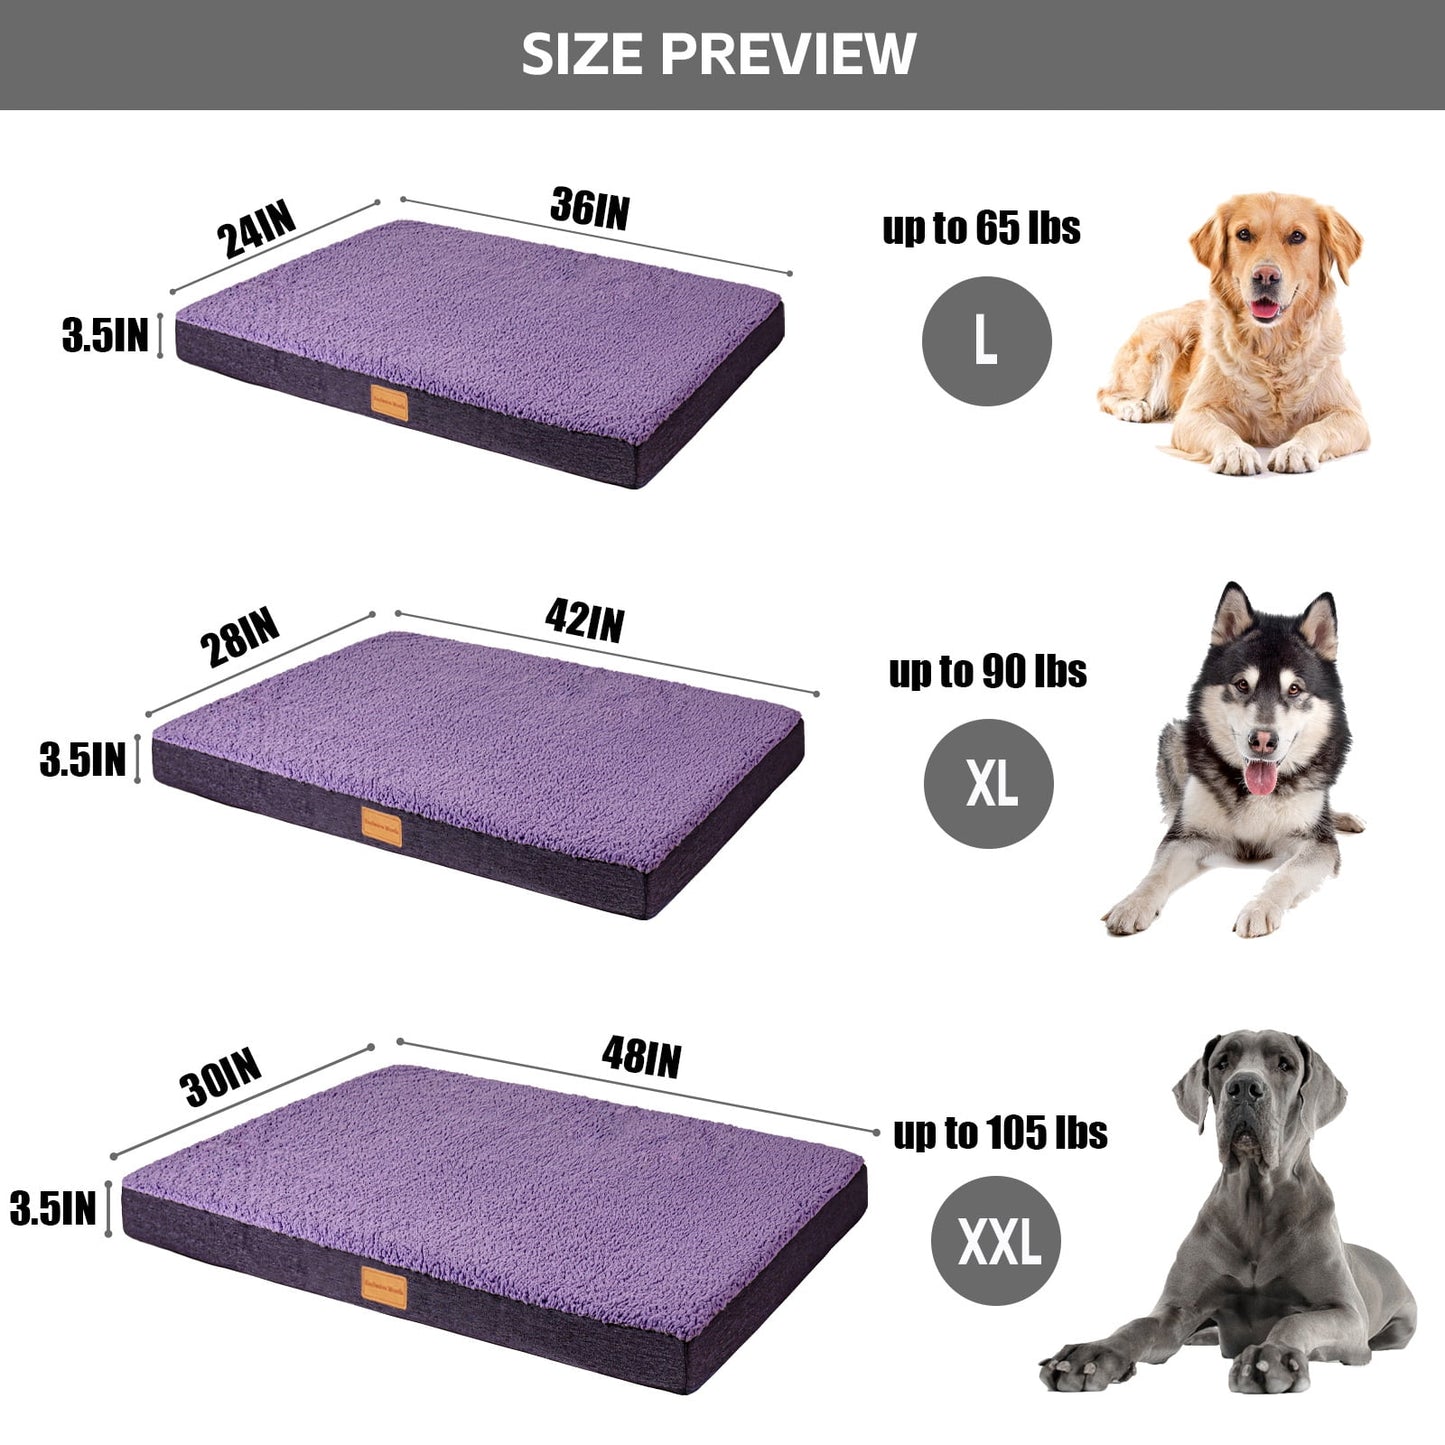 Exclusivo Mezcla Orthopedic XL Dog Bed for Large Dogs 42''X28'', Egg Crate Foam Big Large Dog Beds with Removable Washable Cover,Waterproof Pet Bed Mat, Purple